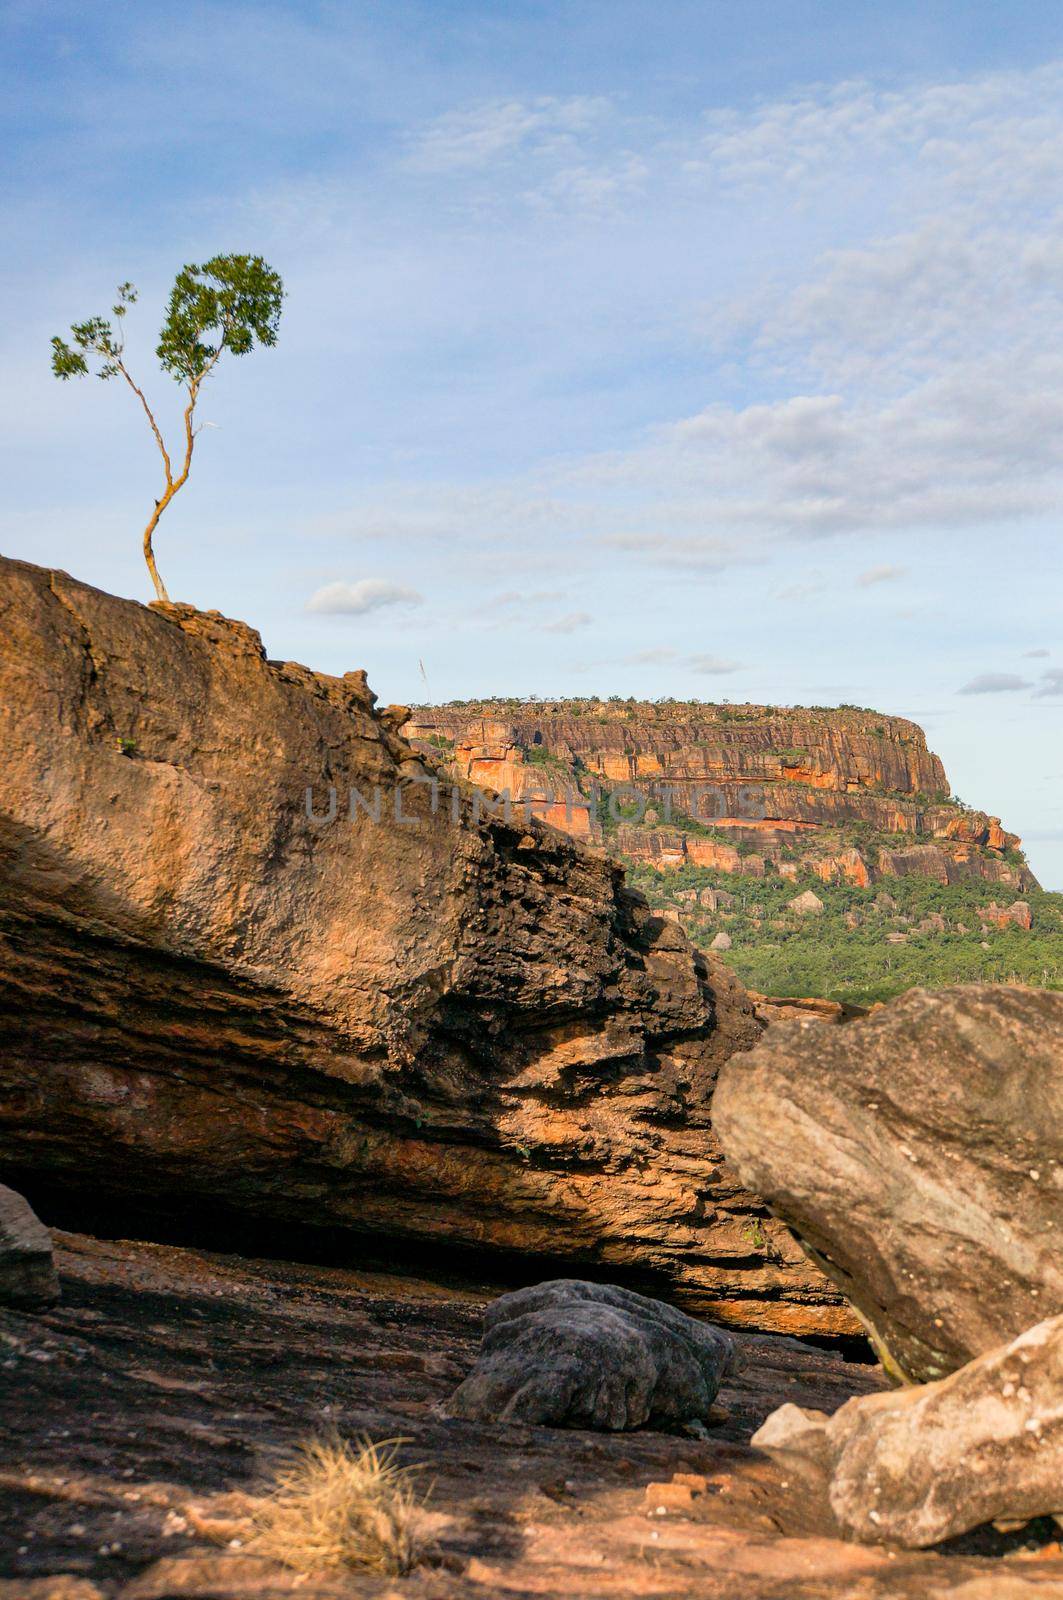 beautiful lonley tree at the Nadab Lookout in ubirr, kakadu national park - australia by bettercallcurry